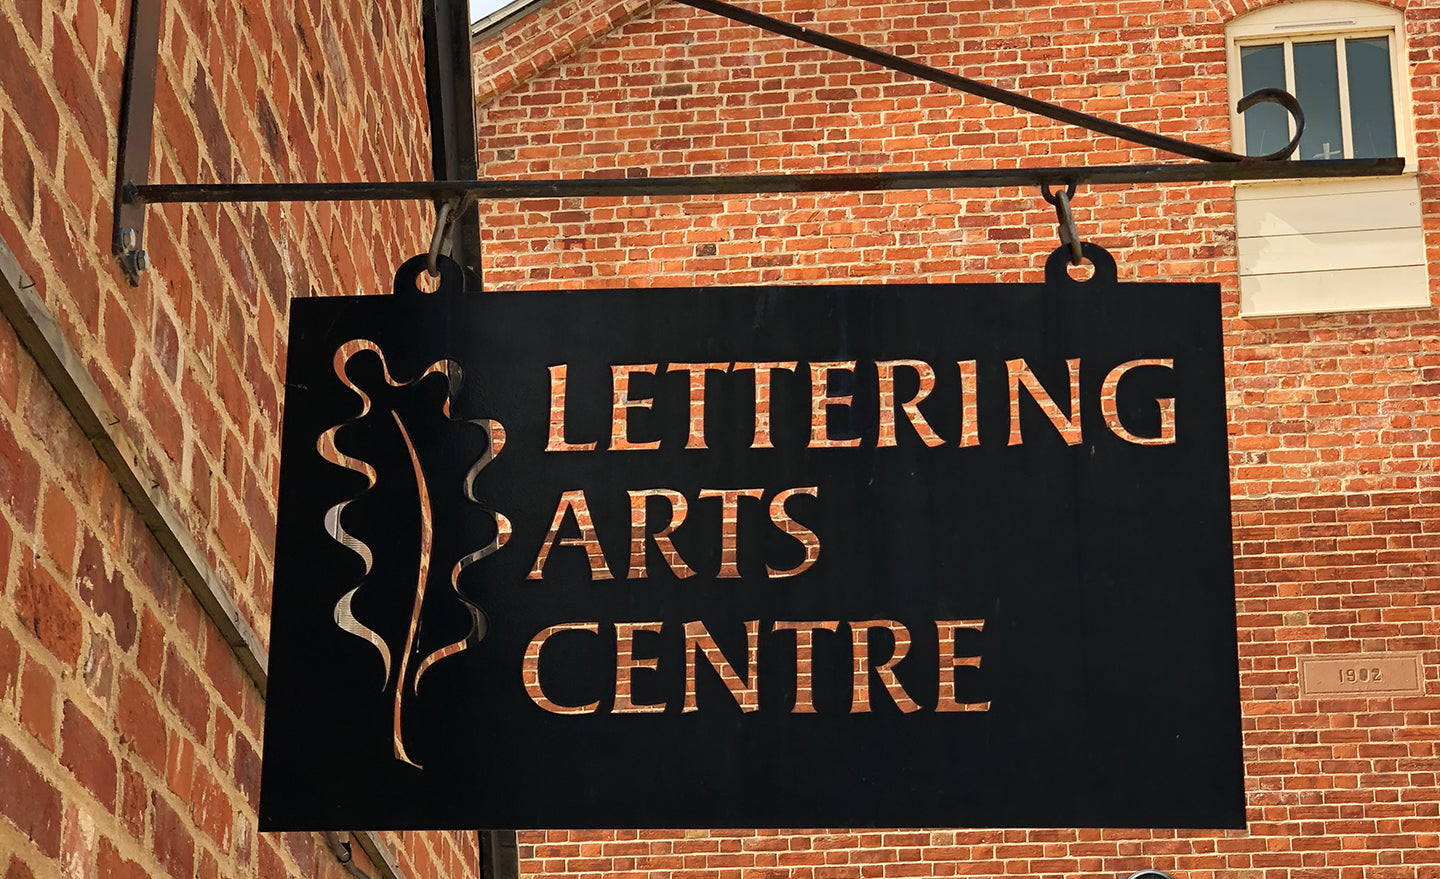 The Lettering Arts Trust